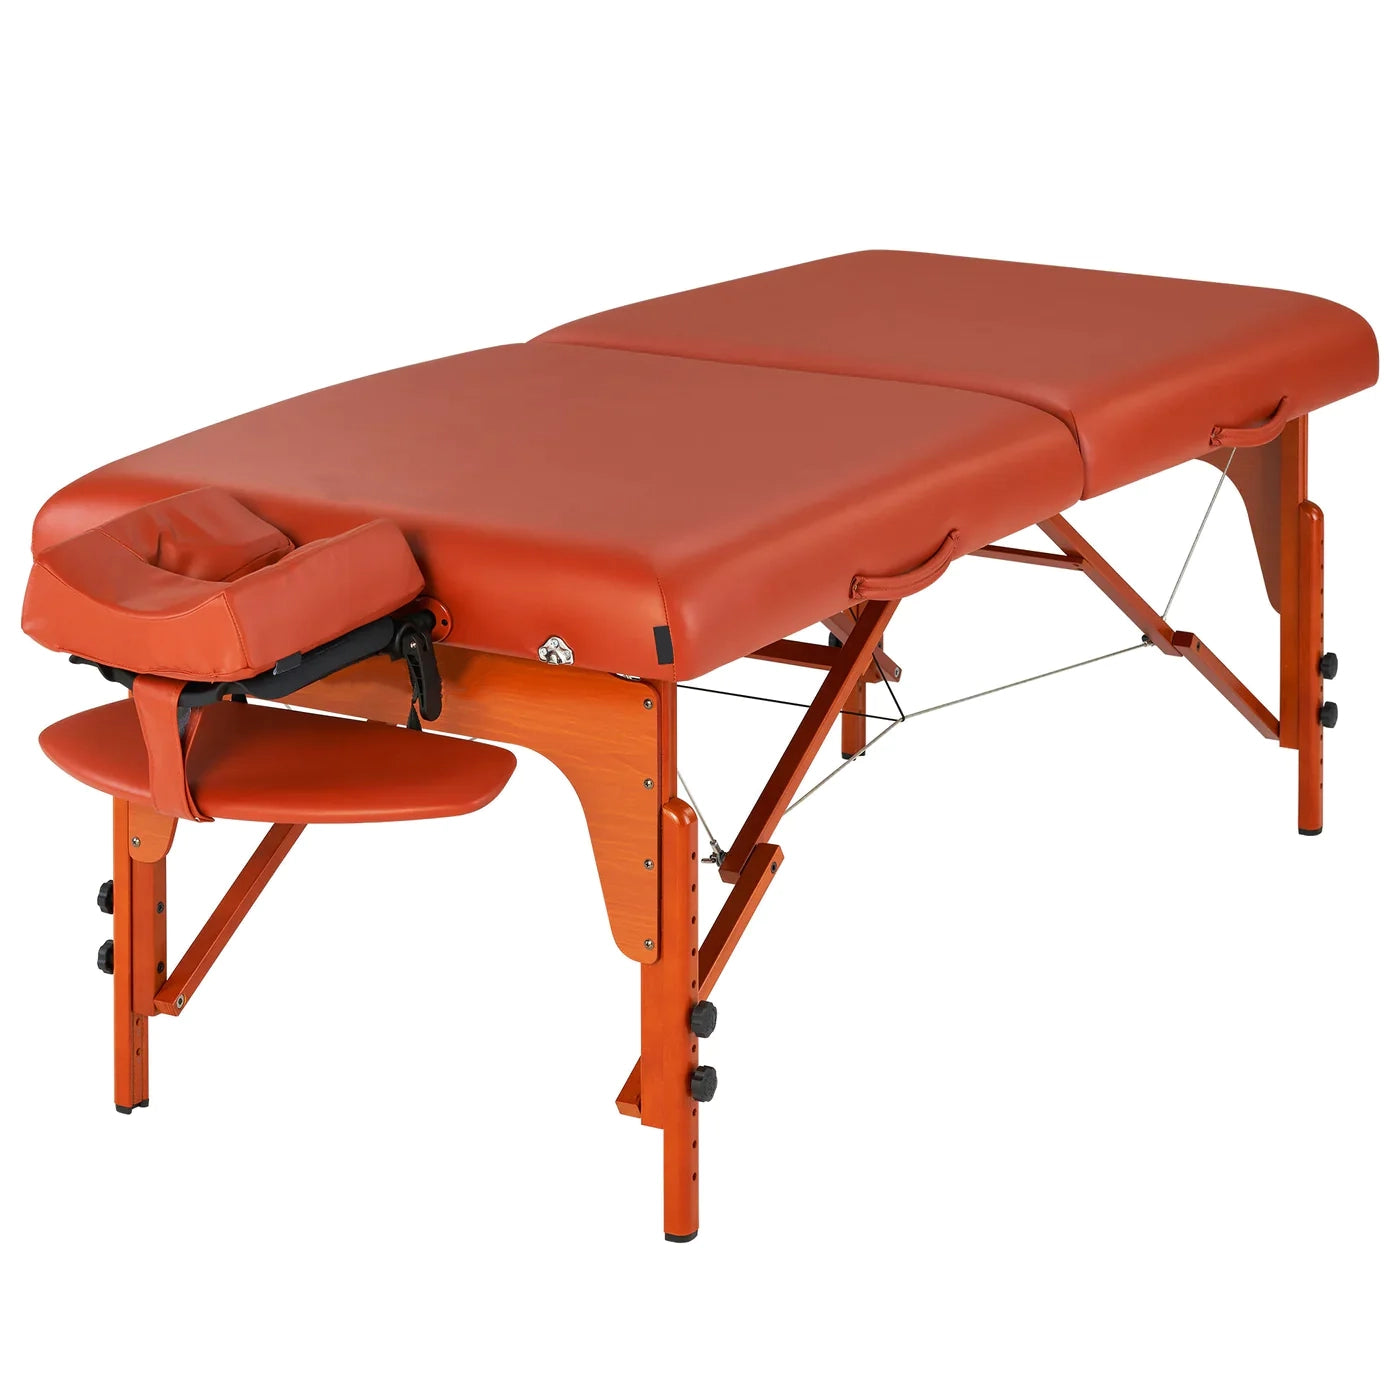 Spabodega 31" SANTANA™ Portable Massage Table Package with Ambient Light System